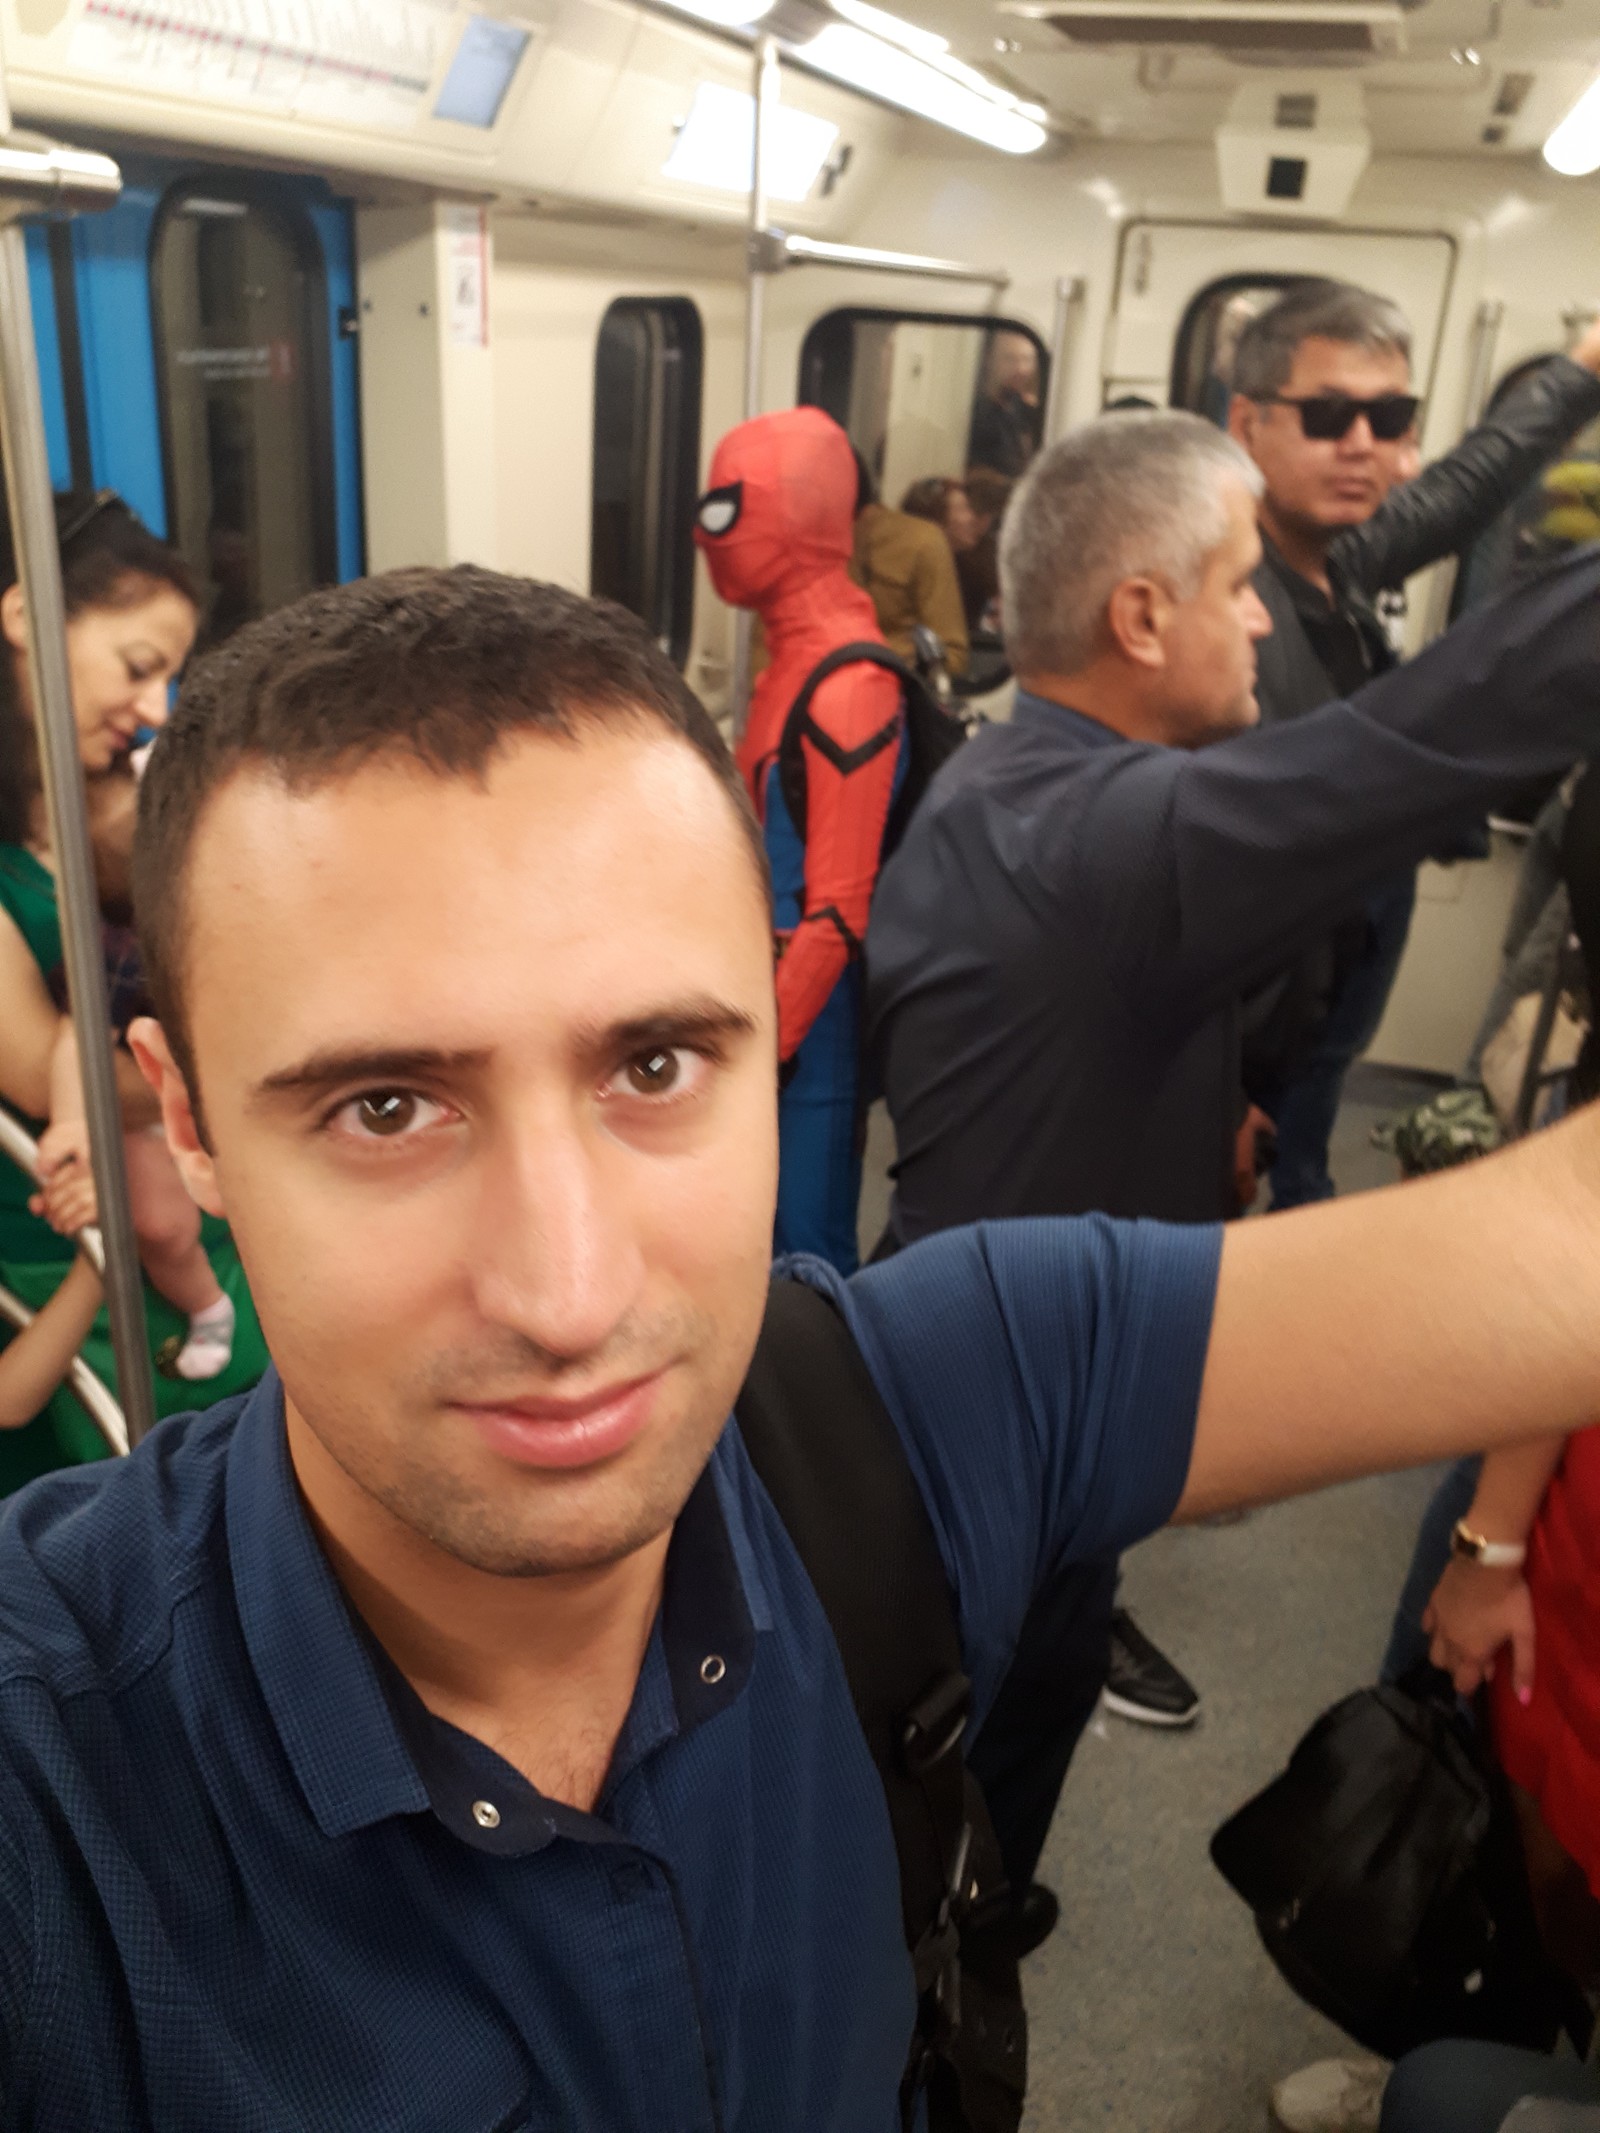 What to do if spider-man rides with you in the same subway car? - Adventures, Metro, Moscow, Marvel, Spiderman, My